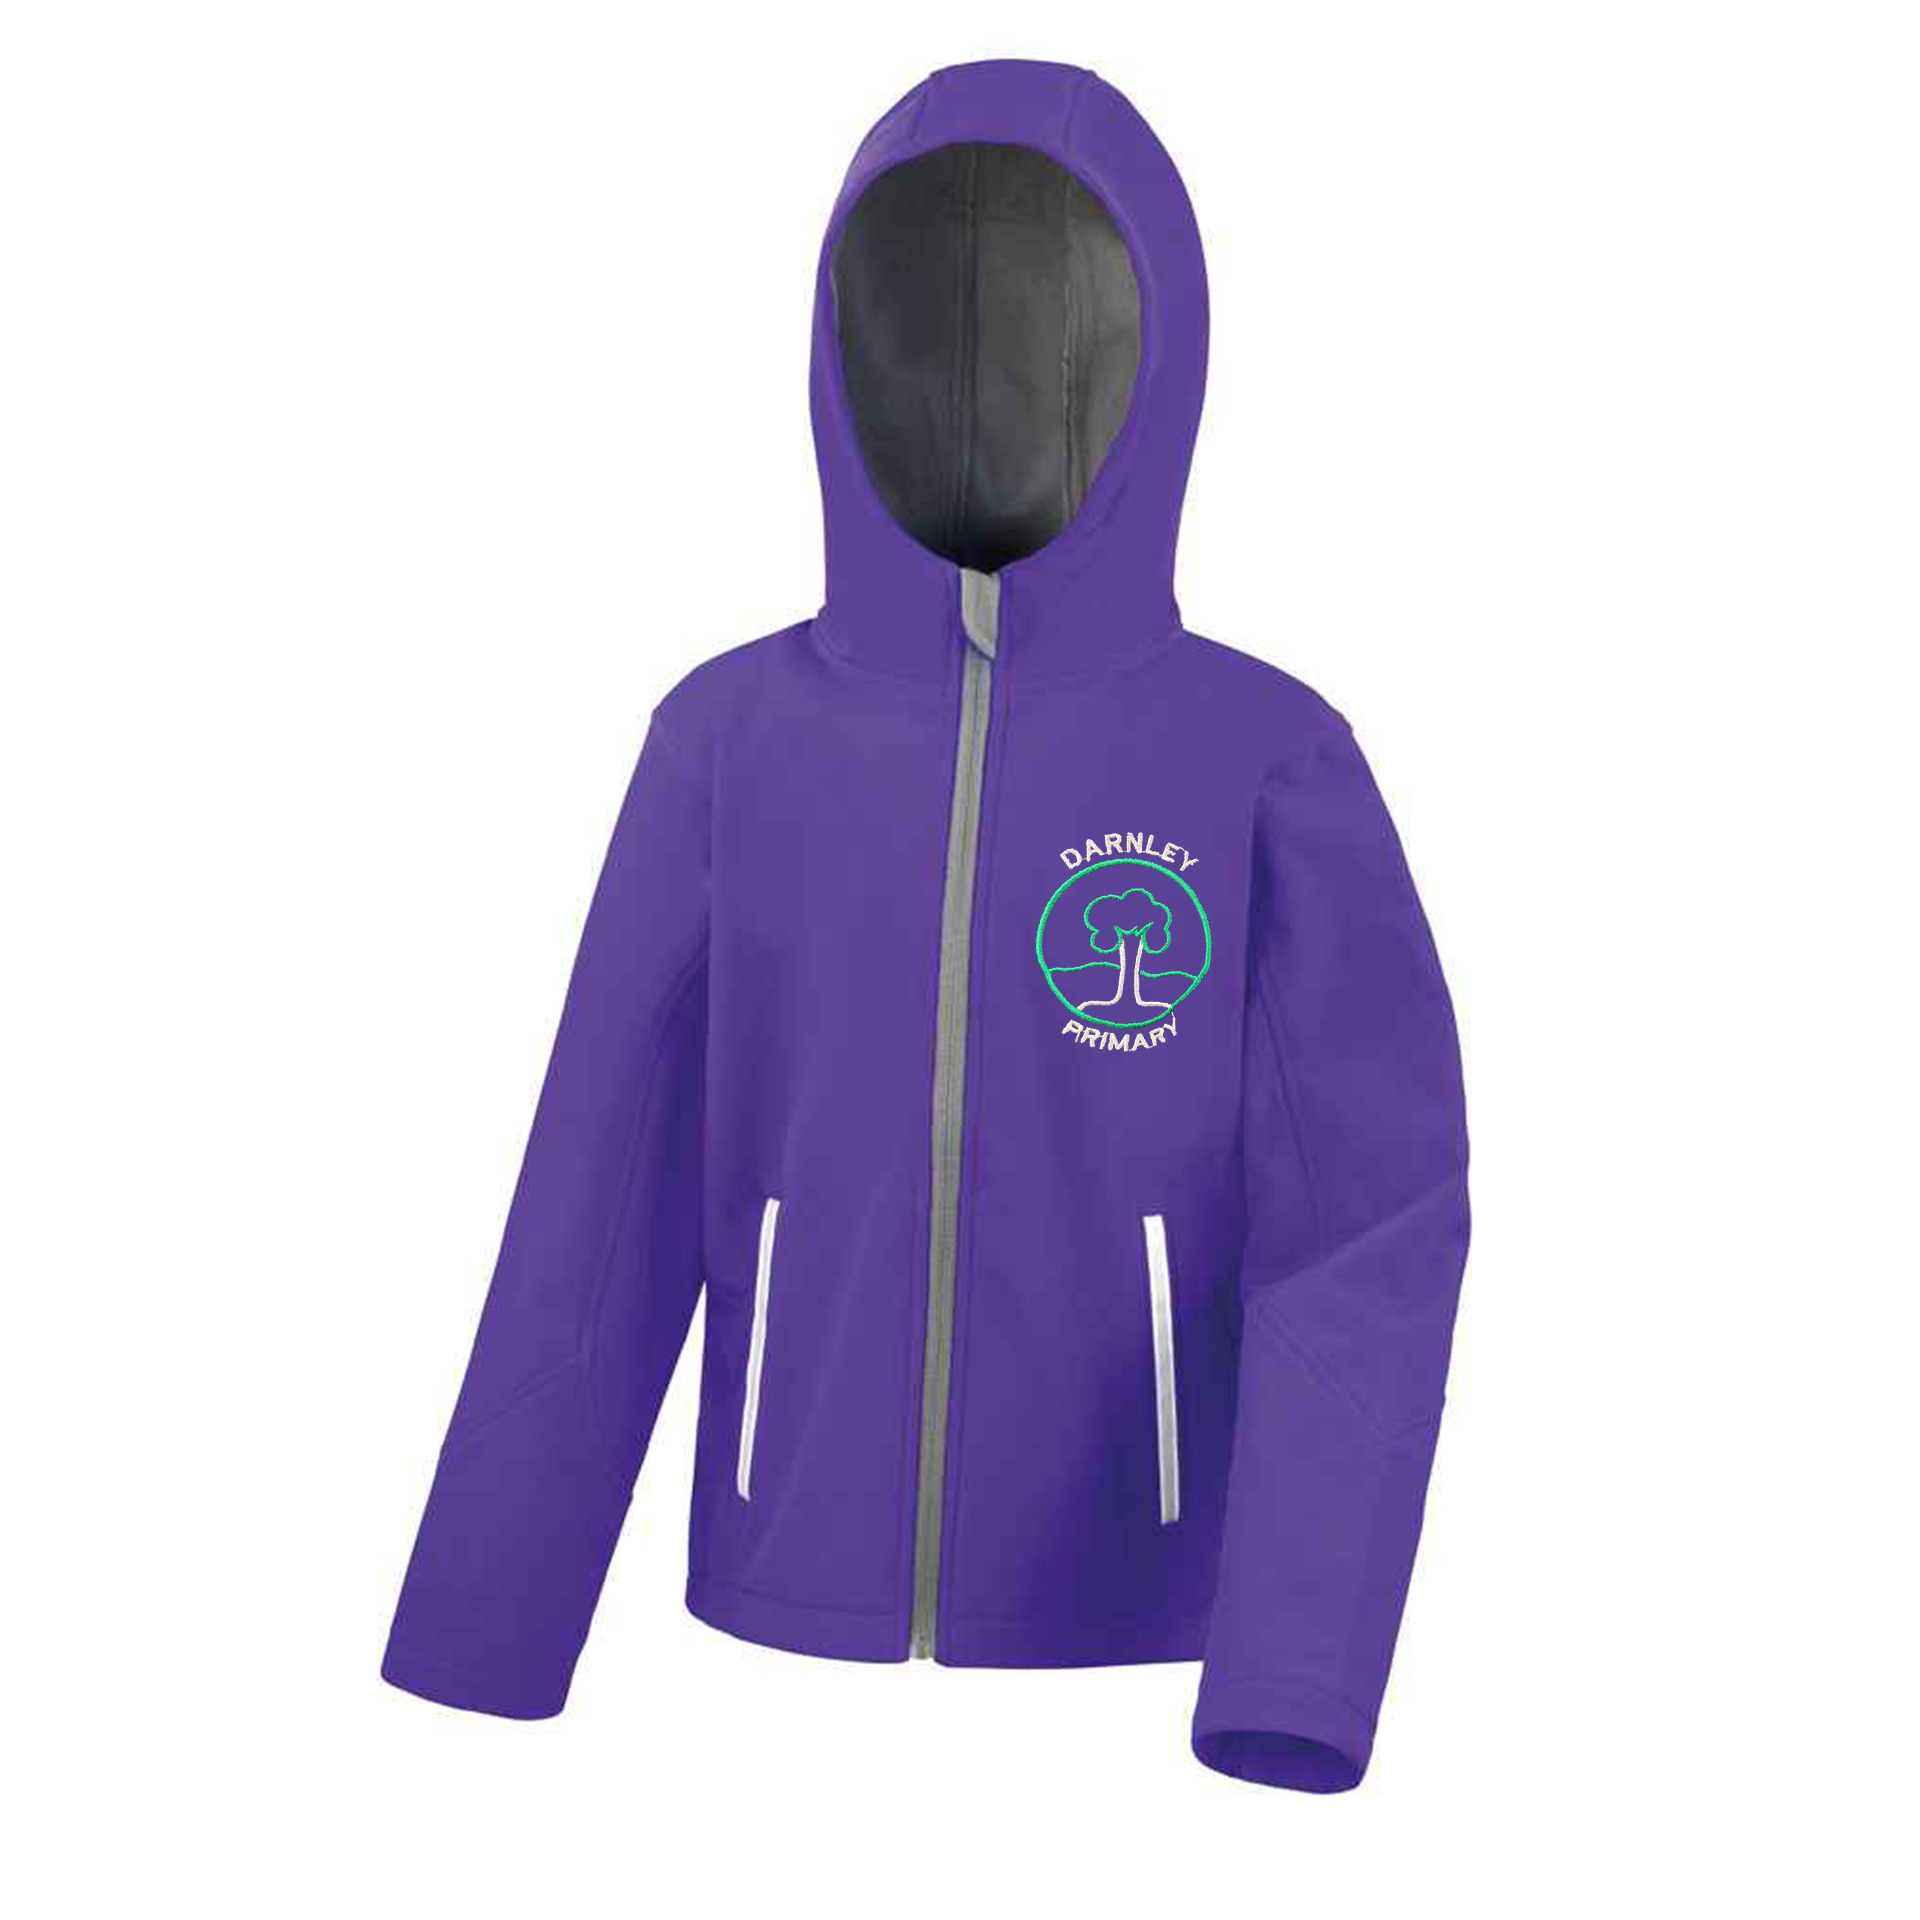 Darnley Primary Soft Shell Jacket (NEW)